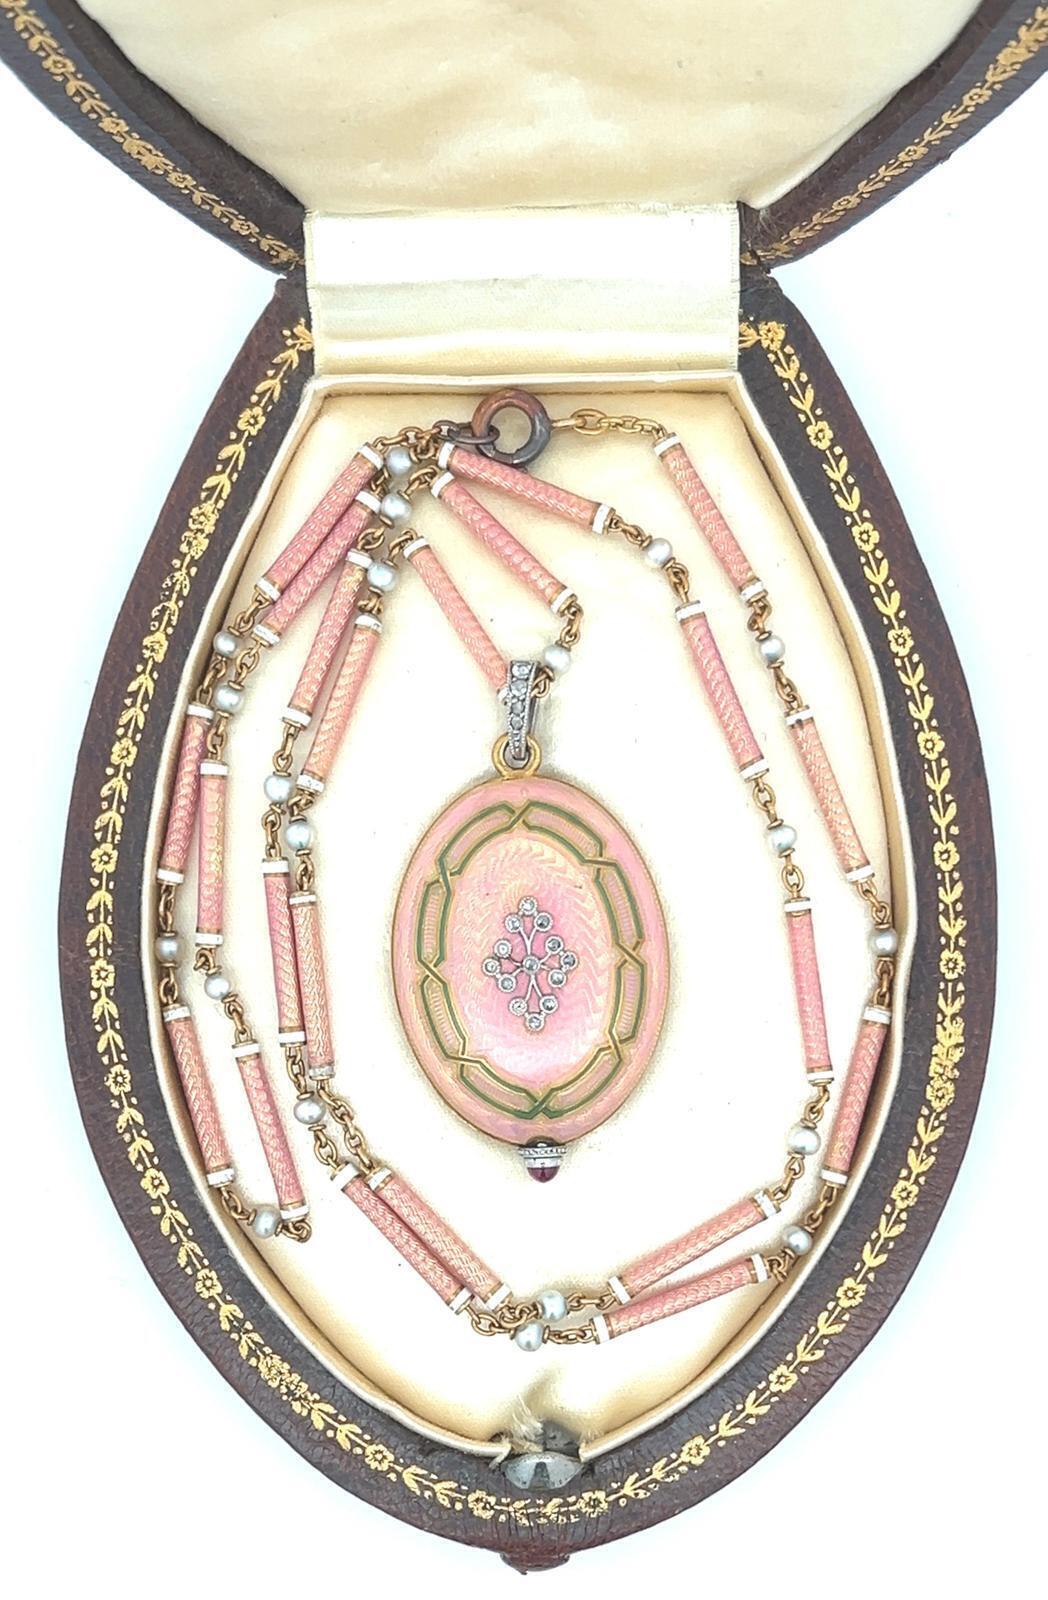 BELLE EPOQUE FRENCH 18K GOLD, ENAMEL, PLATINUM AND DIAMOND OVAL PENDANT WATCH WITH CHAIN, CIRCA 1915